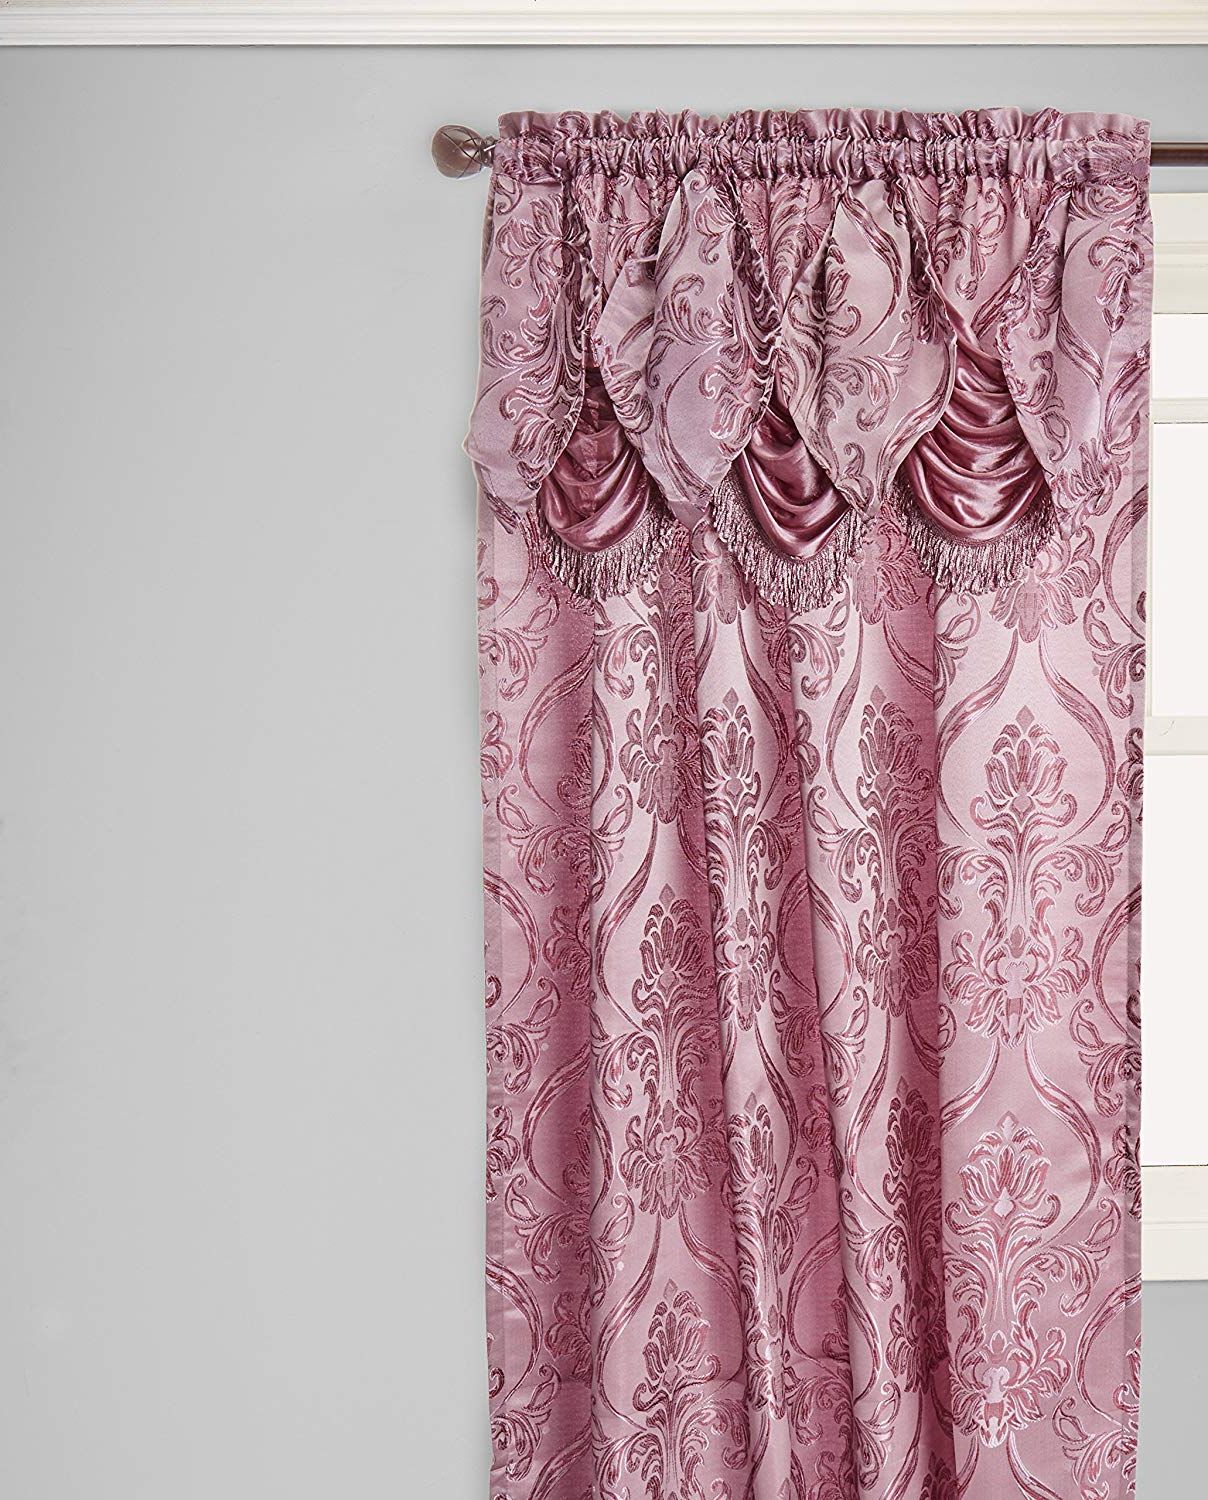 Elegant Comfort Penelopie Jacquard Look Curtain Panel Set With Attached  Waterfall Valance, Set Of 2, 54x84 Inches, Purple Regarding Recent Elegant Comfort Luxury Penelopie Jacquard Window Curtain Panel Pairs (View 7 of 20)